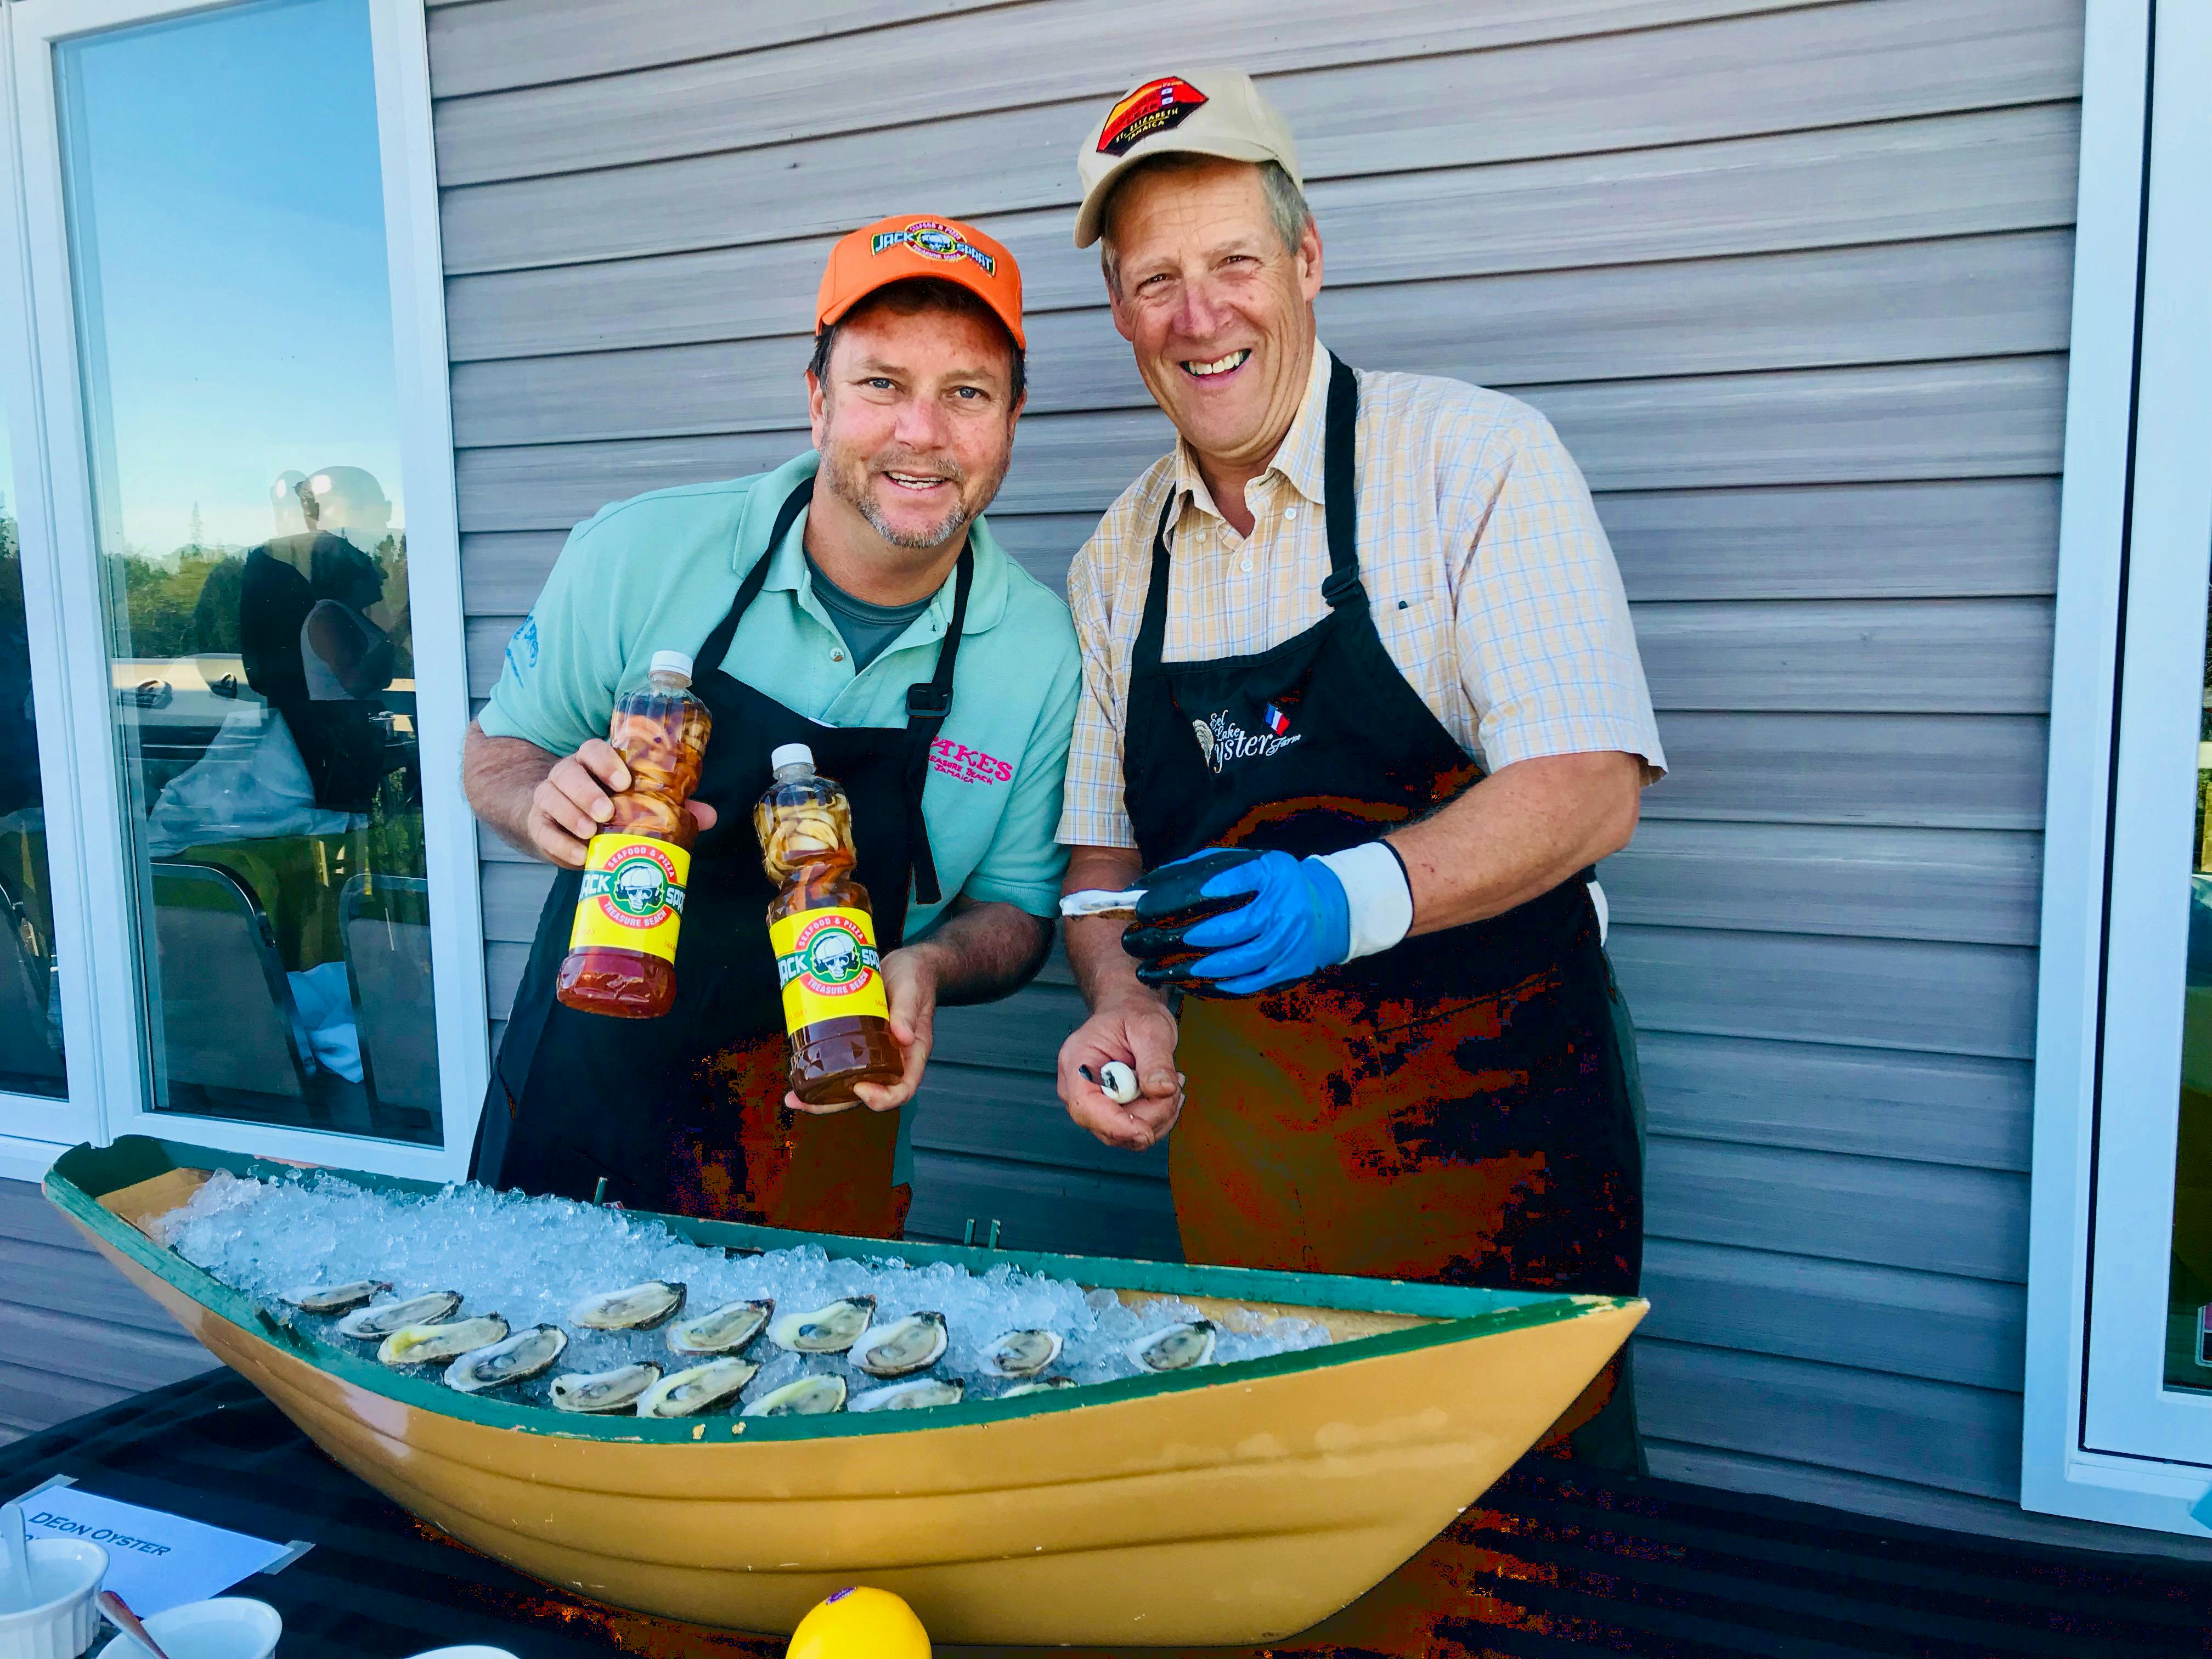 Jason Henzell, left, and Nolan D’Eon serve up fresh oysters from DEon Oyster Company in Eel Lake, Yarmouth County, with Henzell’s sweet or sour oyster sauce, at an event at the West Pubnico Golf & Country Club, hosted as part of the Yarmouth Seafood and Wine Extravaganza with a Jamaican twist. Henzell owns restaurants and a resort in Jamaica.